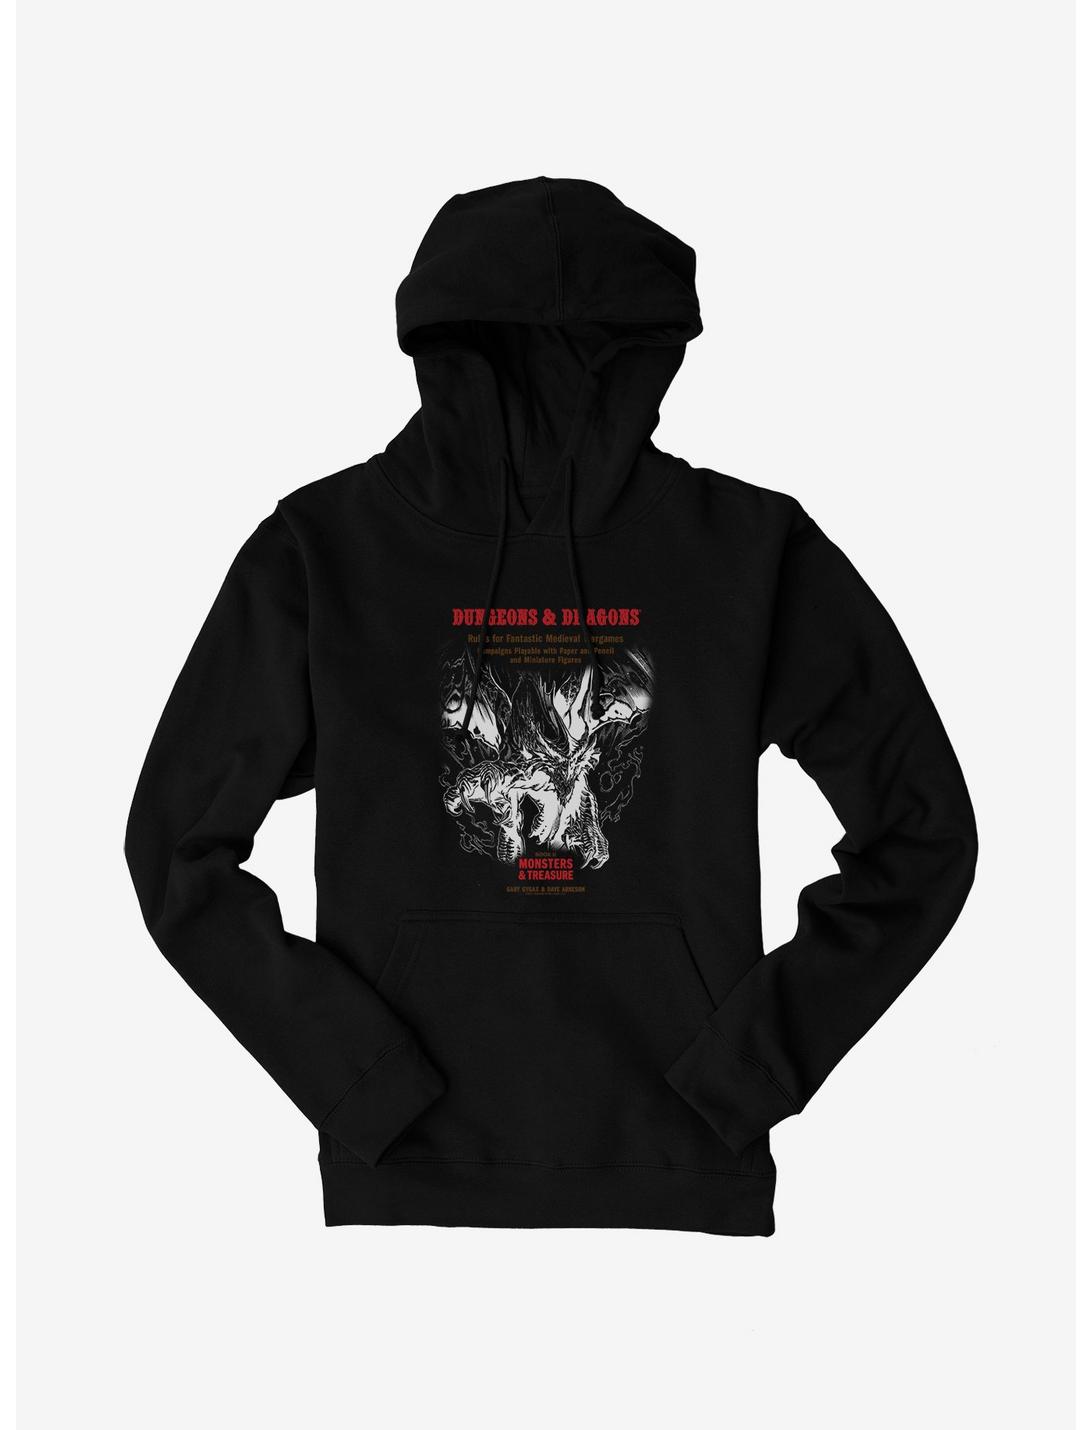 Dungeons & Dragons White Box Dragon and Flames Hoodie, , hi-res